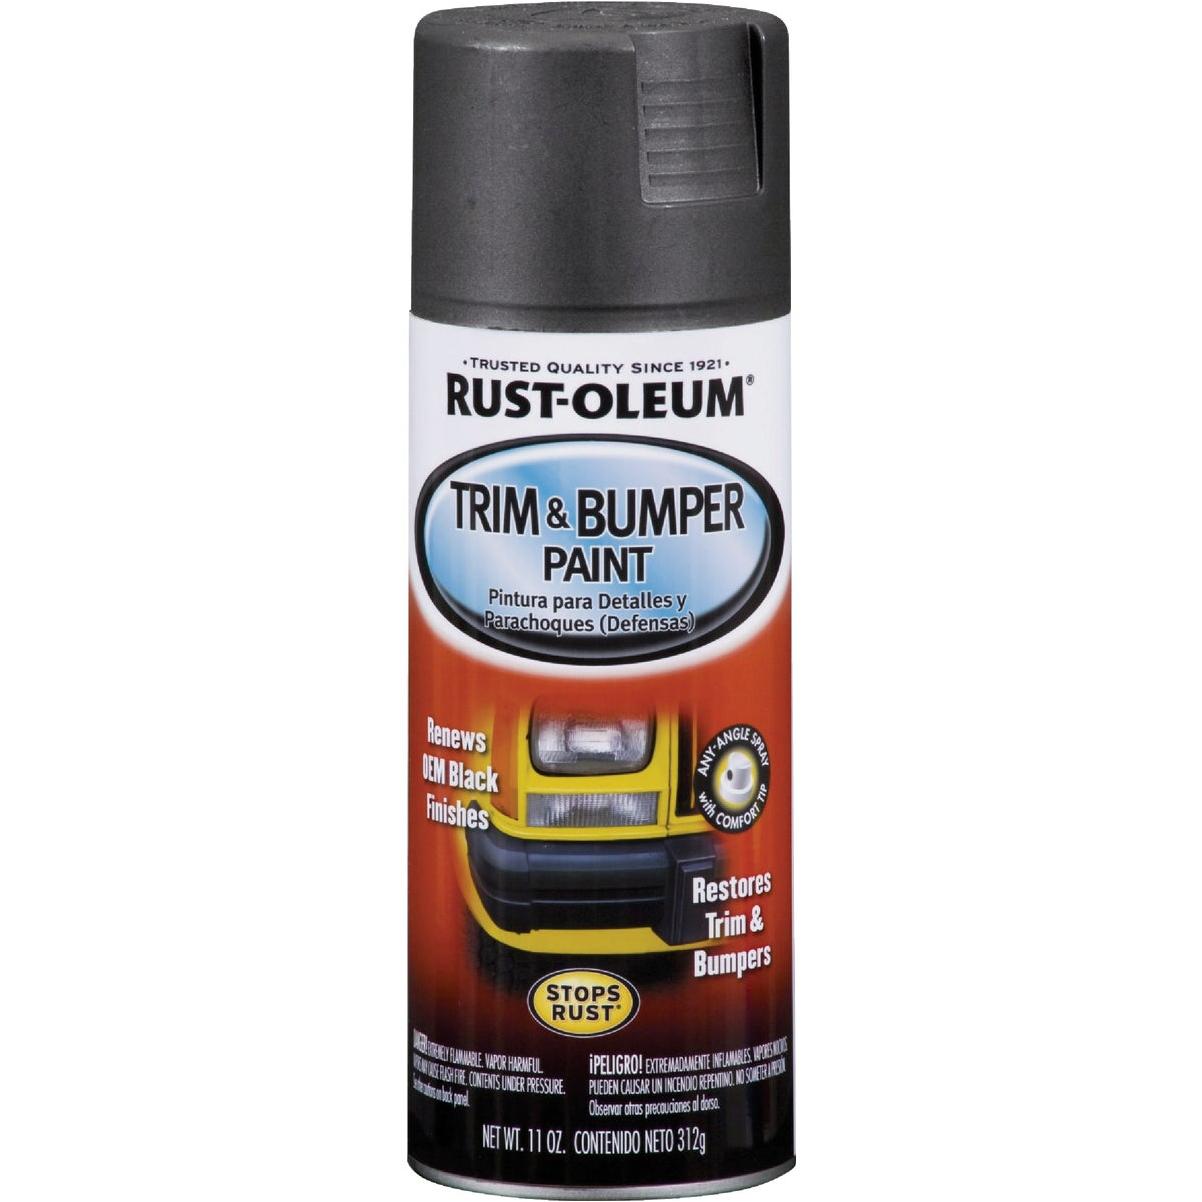 Rust-Oleum Sure Color Semi-Gloss White Interior Wall Paint and